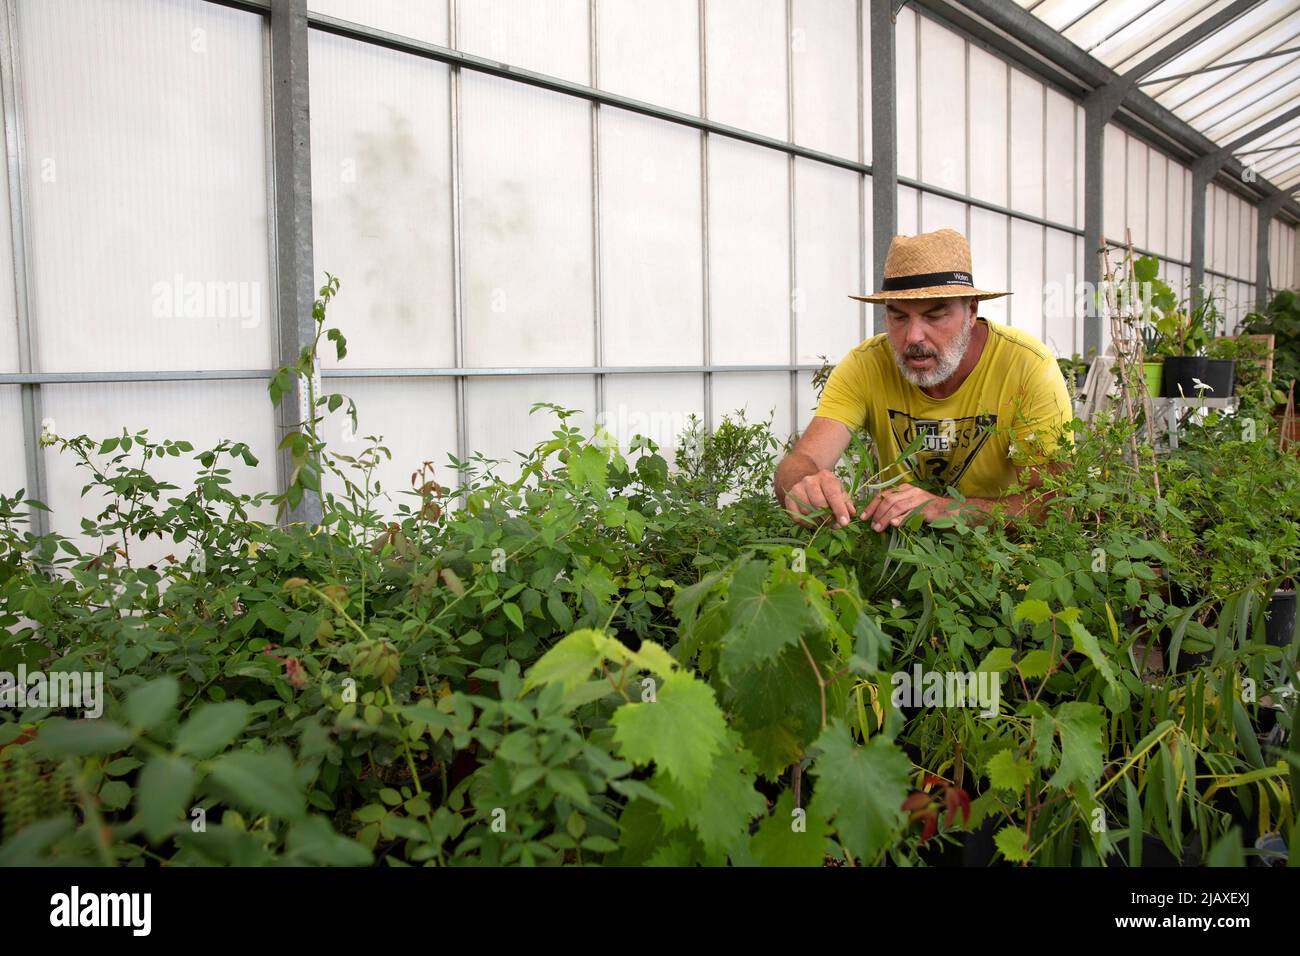 Christophe Mege, 49, head gardener, portrayed in the green house of the International Perfume Museum's Gardens in Grasse, France on September 10, 2021. 'The same rose or the same jasmine grown in Egypt or Morocco, it will be different from the rose grown in Grasse,' Christophe Meze says. 'It's like wine, you can have the same type of grape, but you won't have the same wine because of the sun, because of the soil, because of the terroir.' Grasse has had a prospering perfume industry since the end of the 18th century and is considered the world's capital of perfume. There are numerous of old 'pa Stock Photo